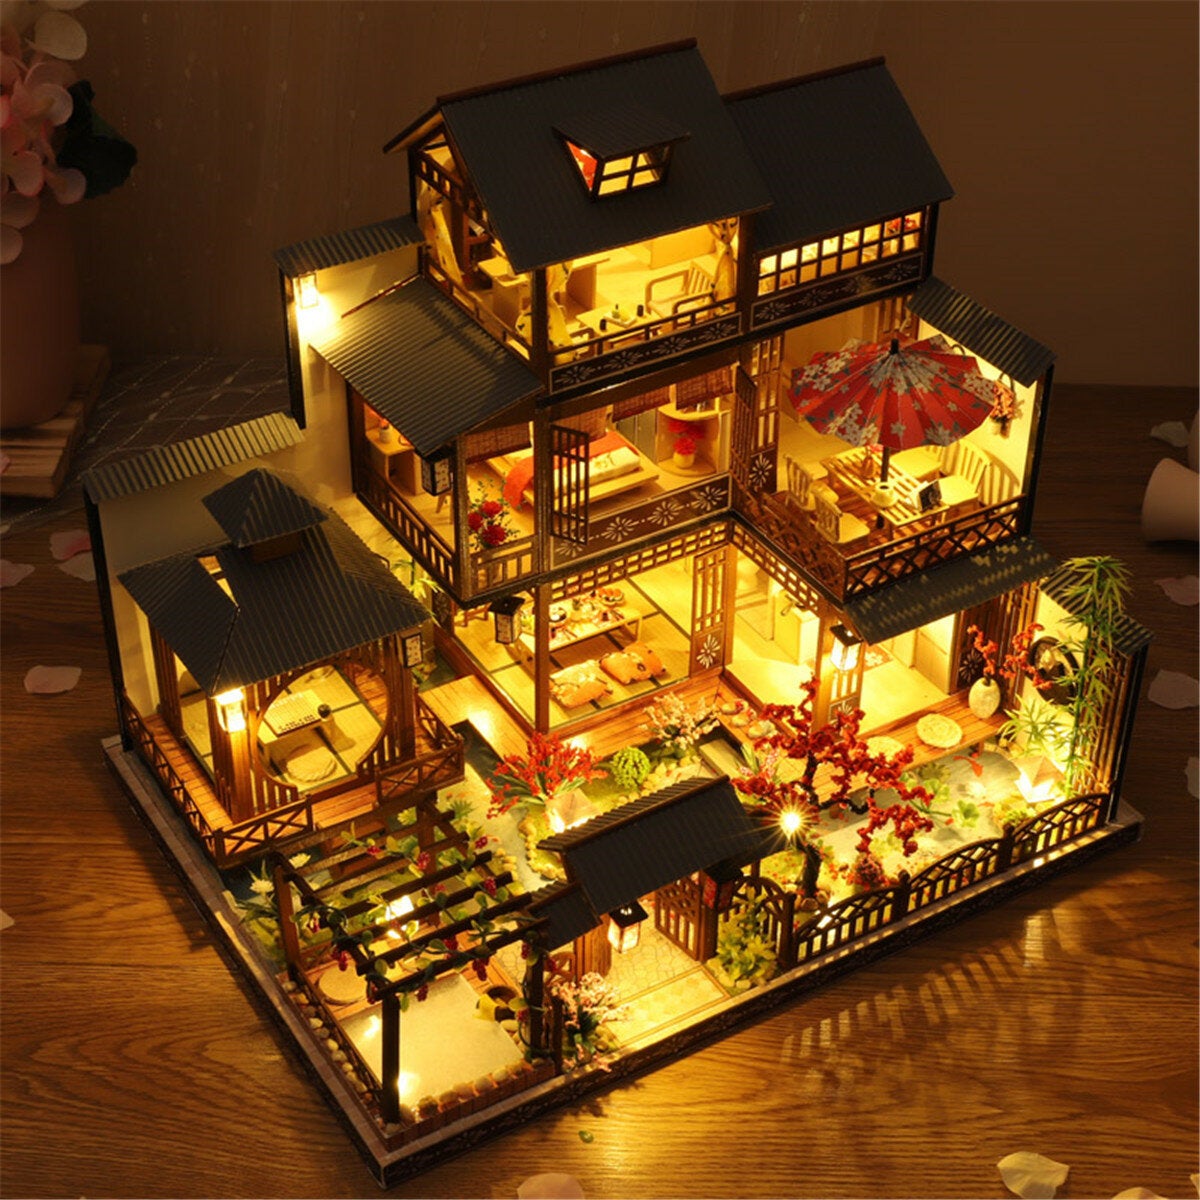 Wooden DIY Japanese Villa Doll House Miniature Kits Handmade Assemble Toy with Furniture LED Light for Gift Collection Home Decor